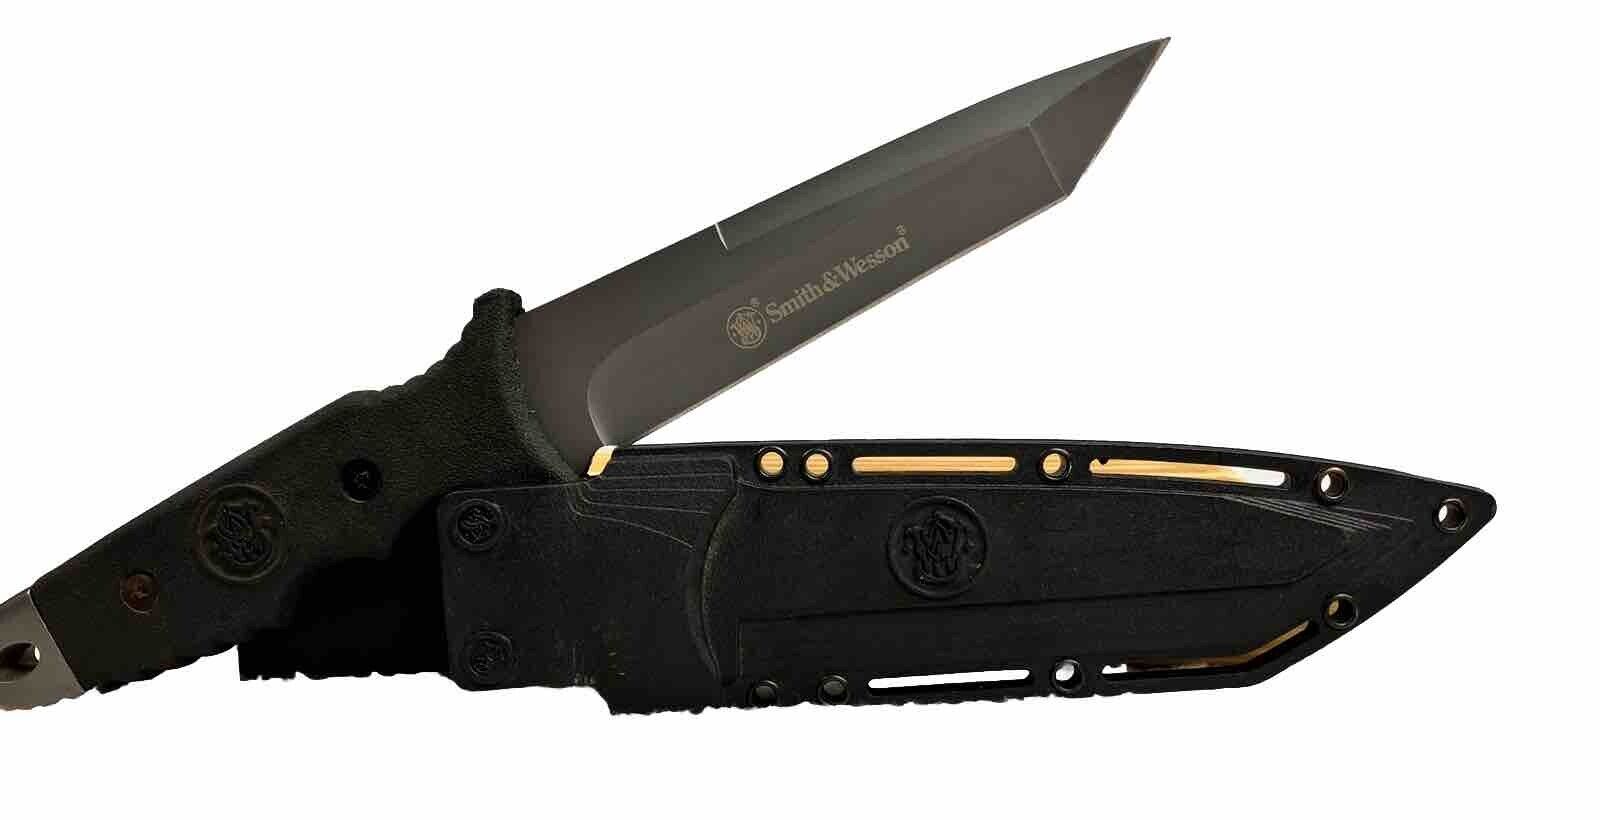 Smith & Wesson S&W Full Tang Fixed Blade Tanto Knife w/ Plain Edge Blade SW7